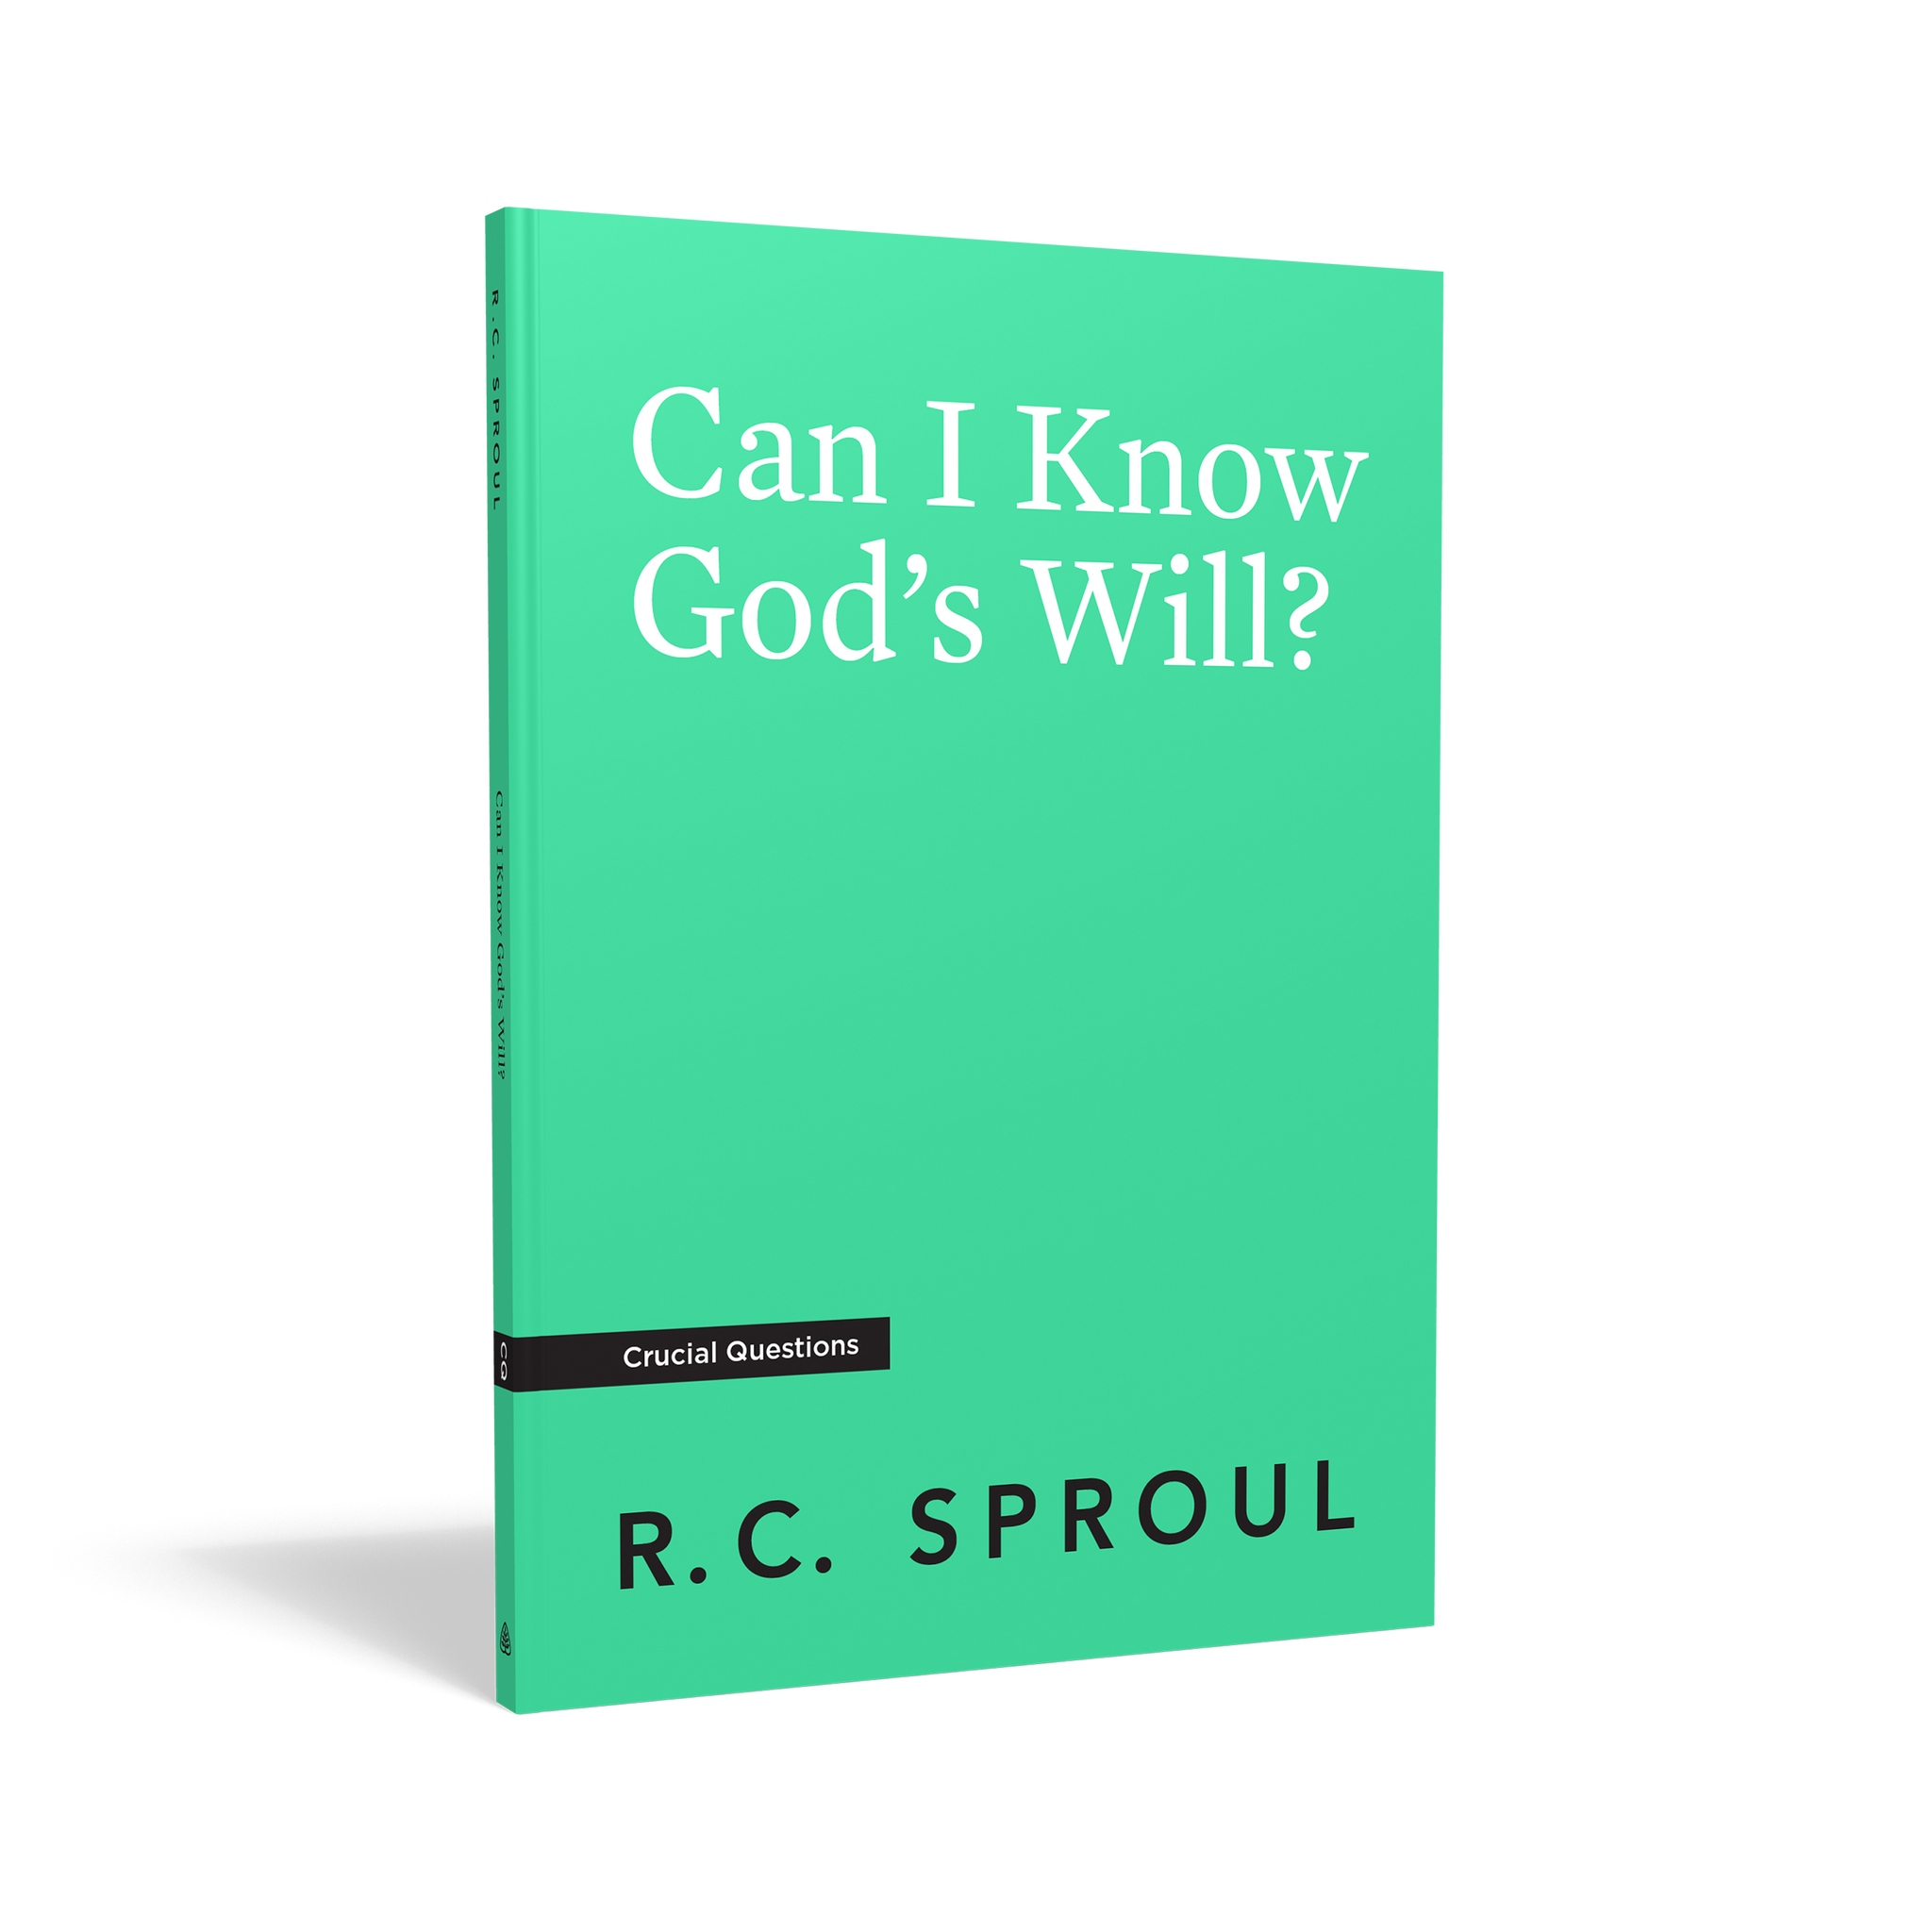 Crucial Questions - Can I Know God's Will?